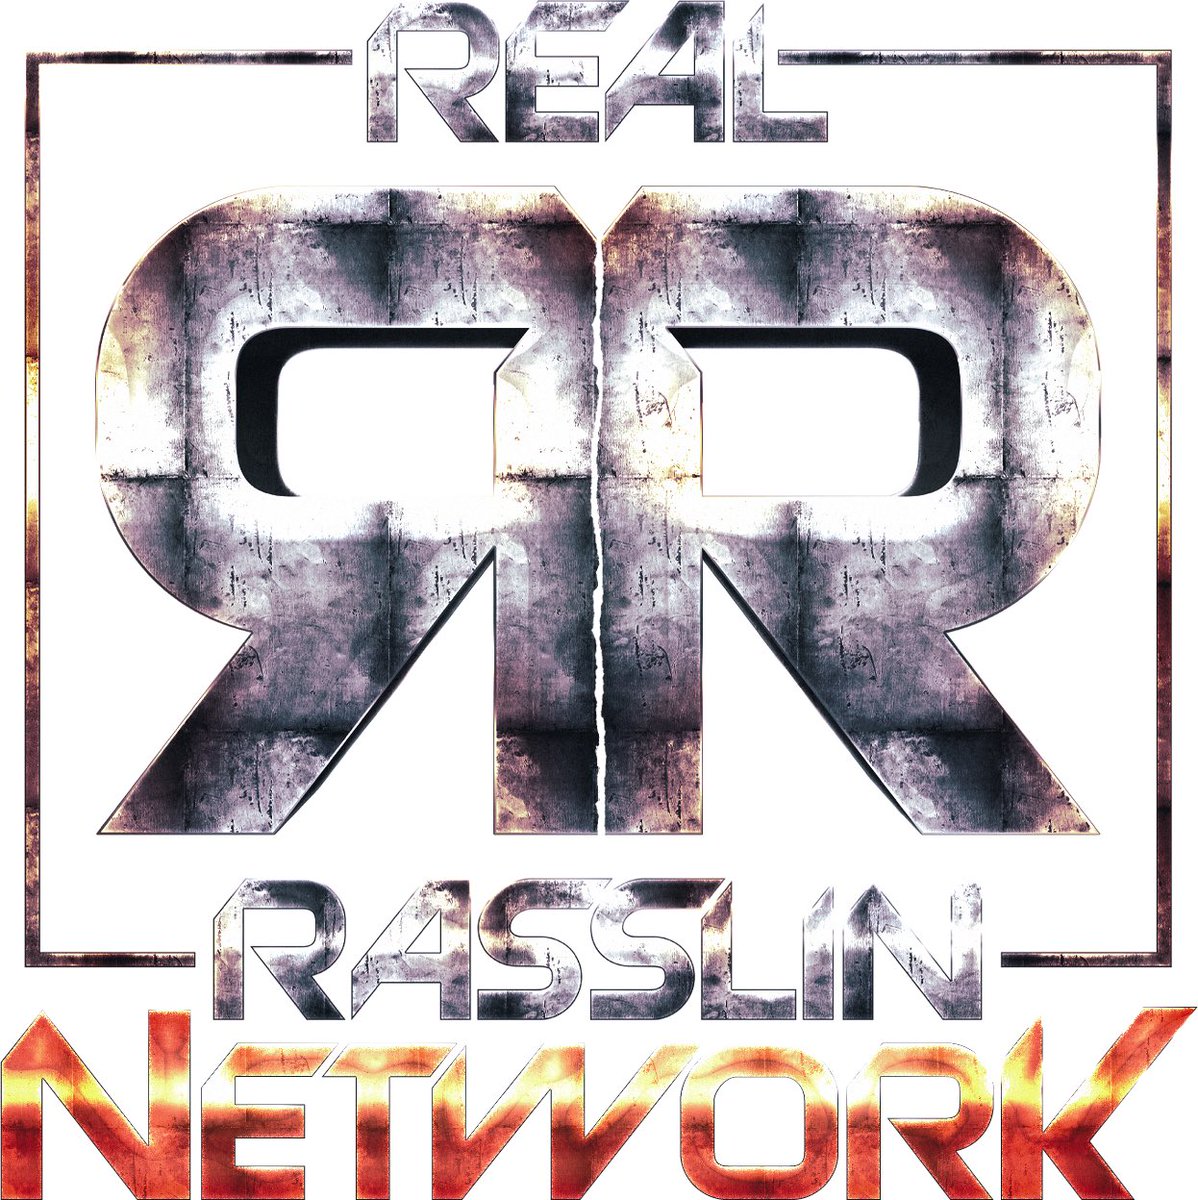 A new way to watch wrestling! Join @INFAMOUS_WP @OffThePage_WP @EcaWrestling and grab a free trial for 7 days! RealRasslin.net/network #ProWrestling #Network